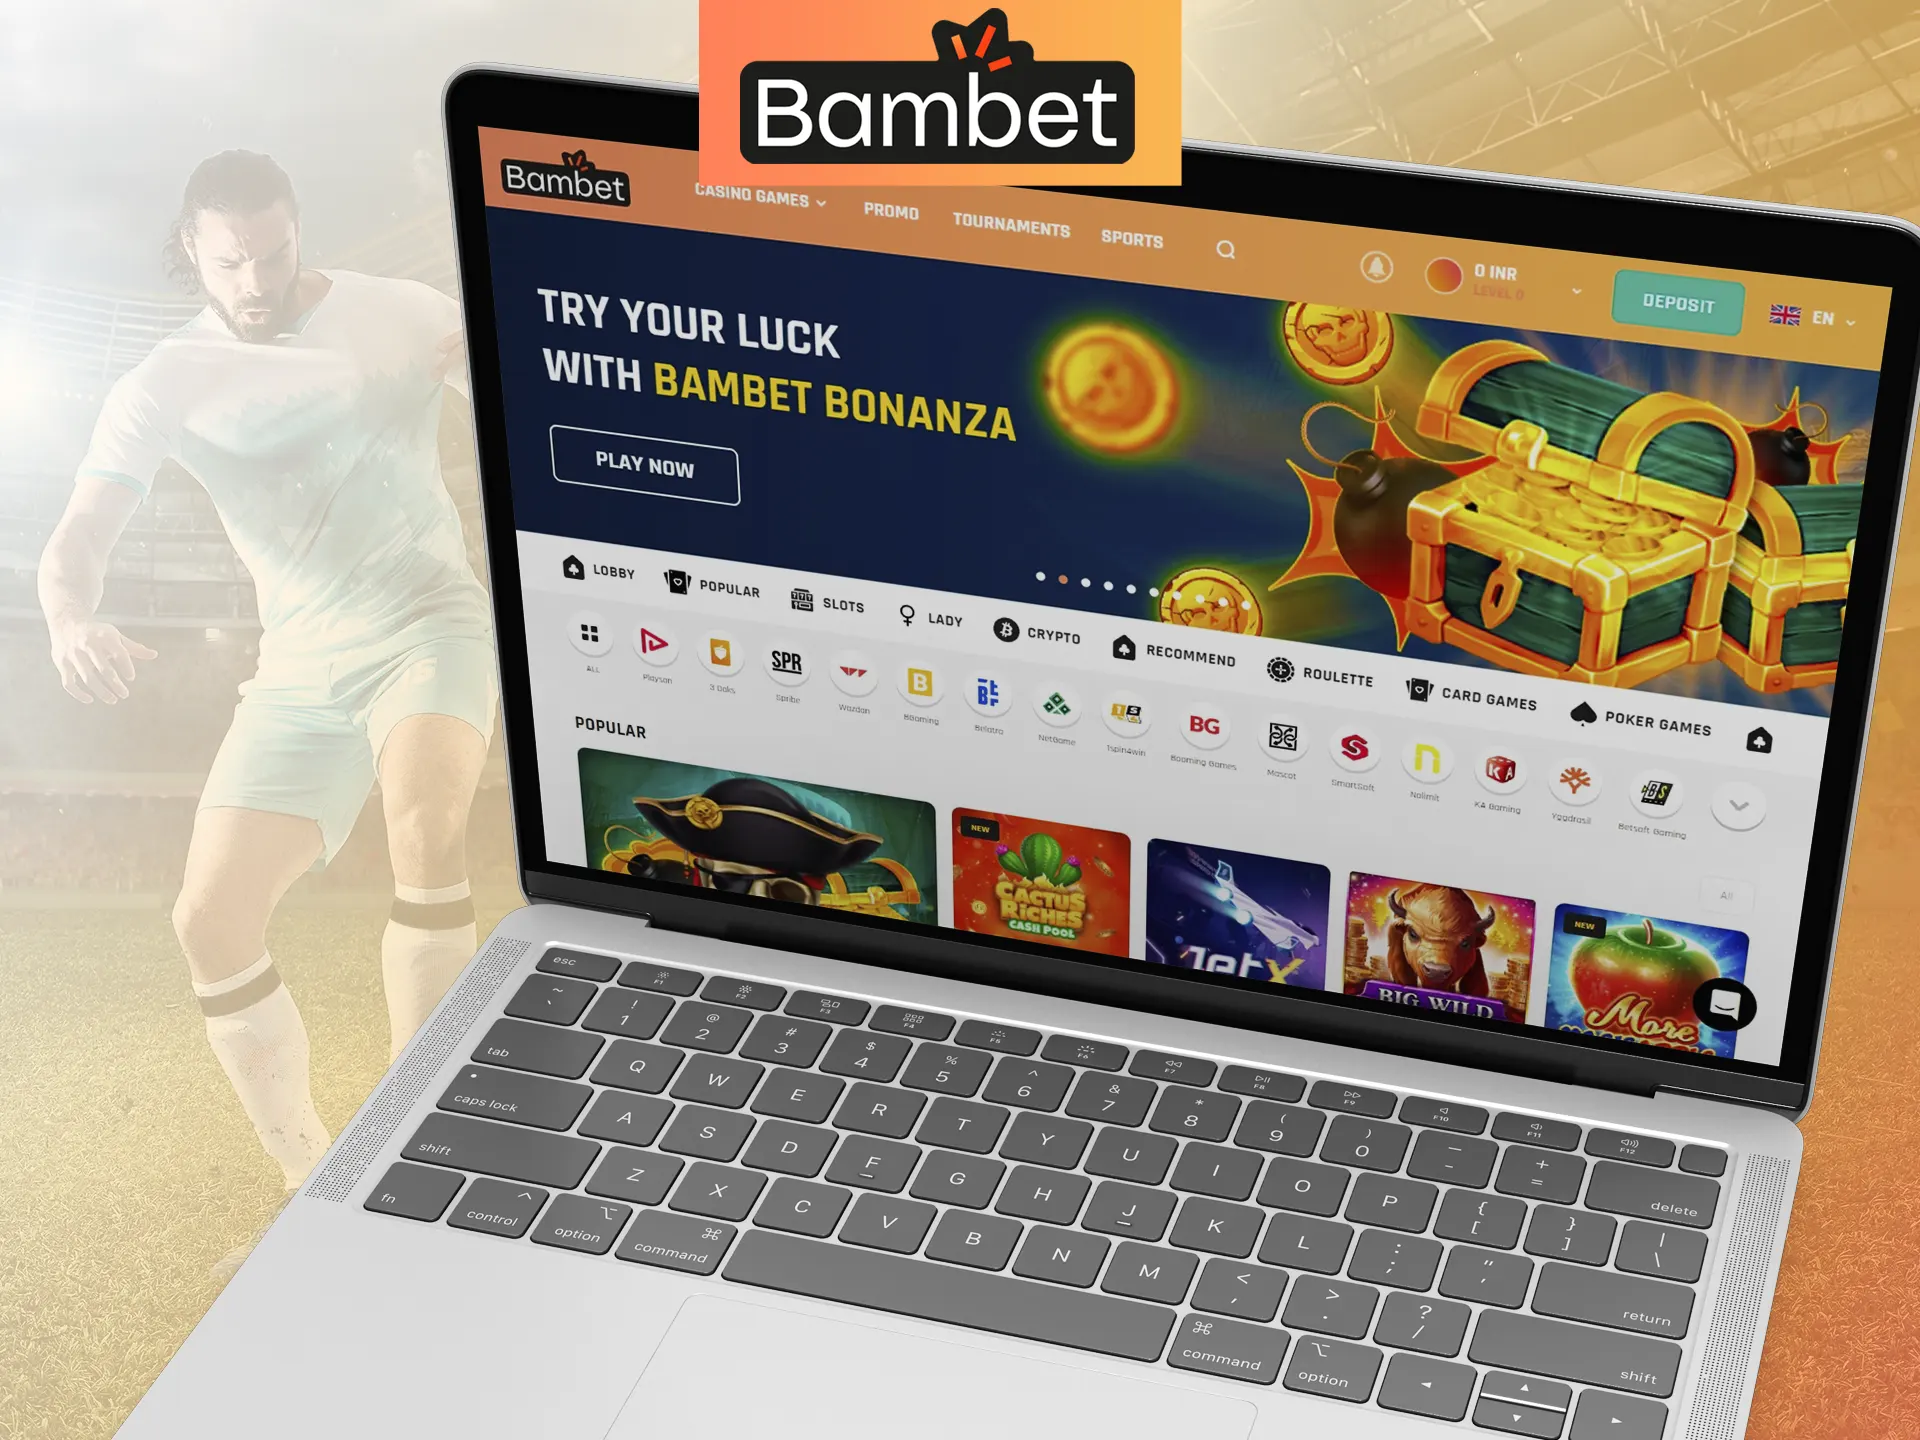 Be sure to visit the official Bambet website and make your winning bet.